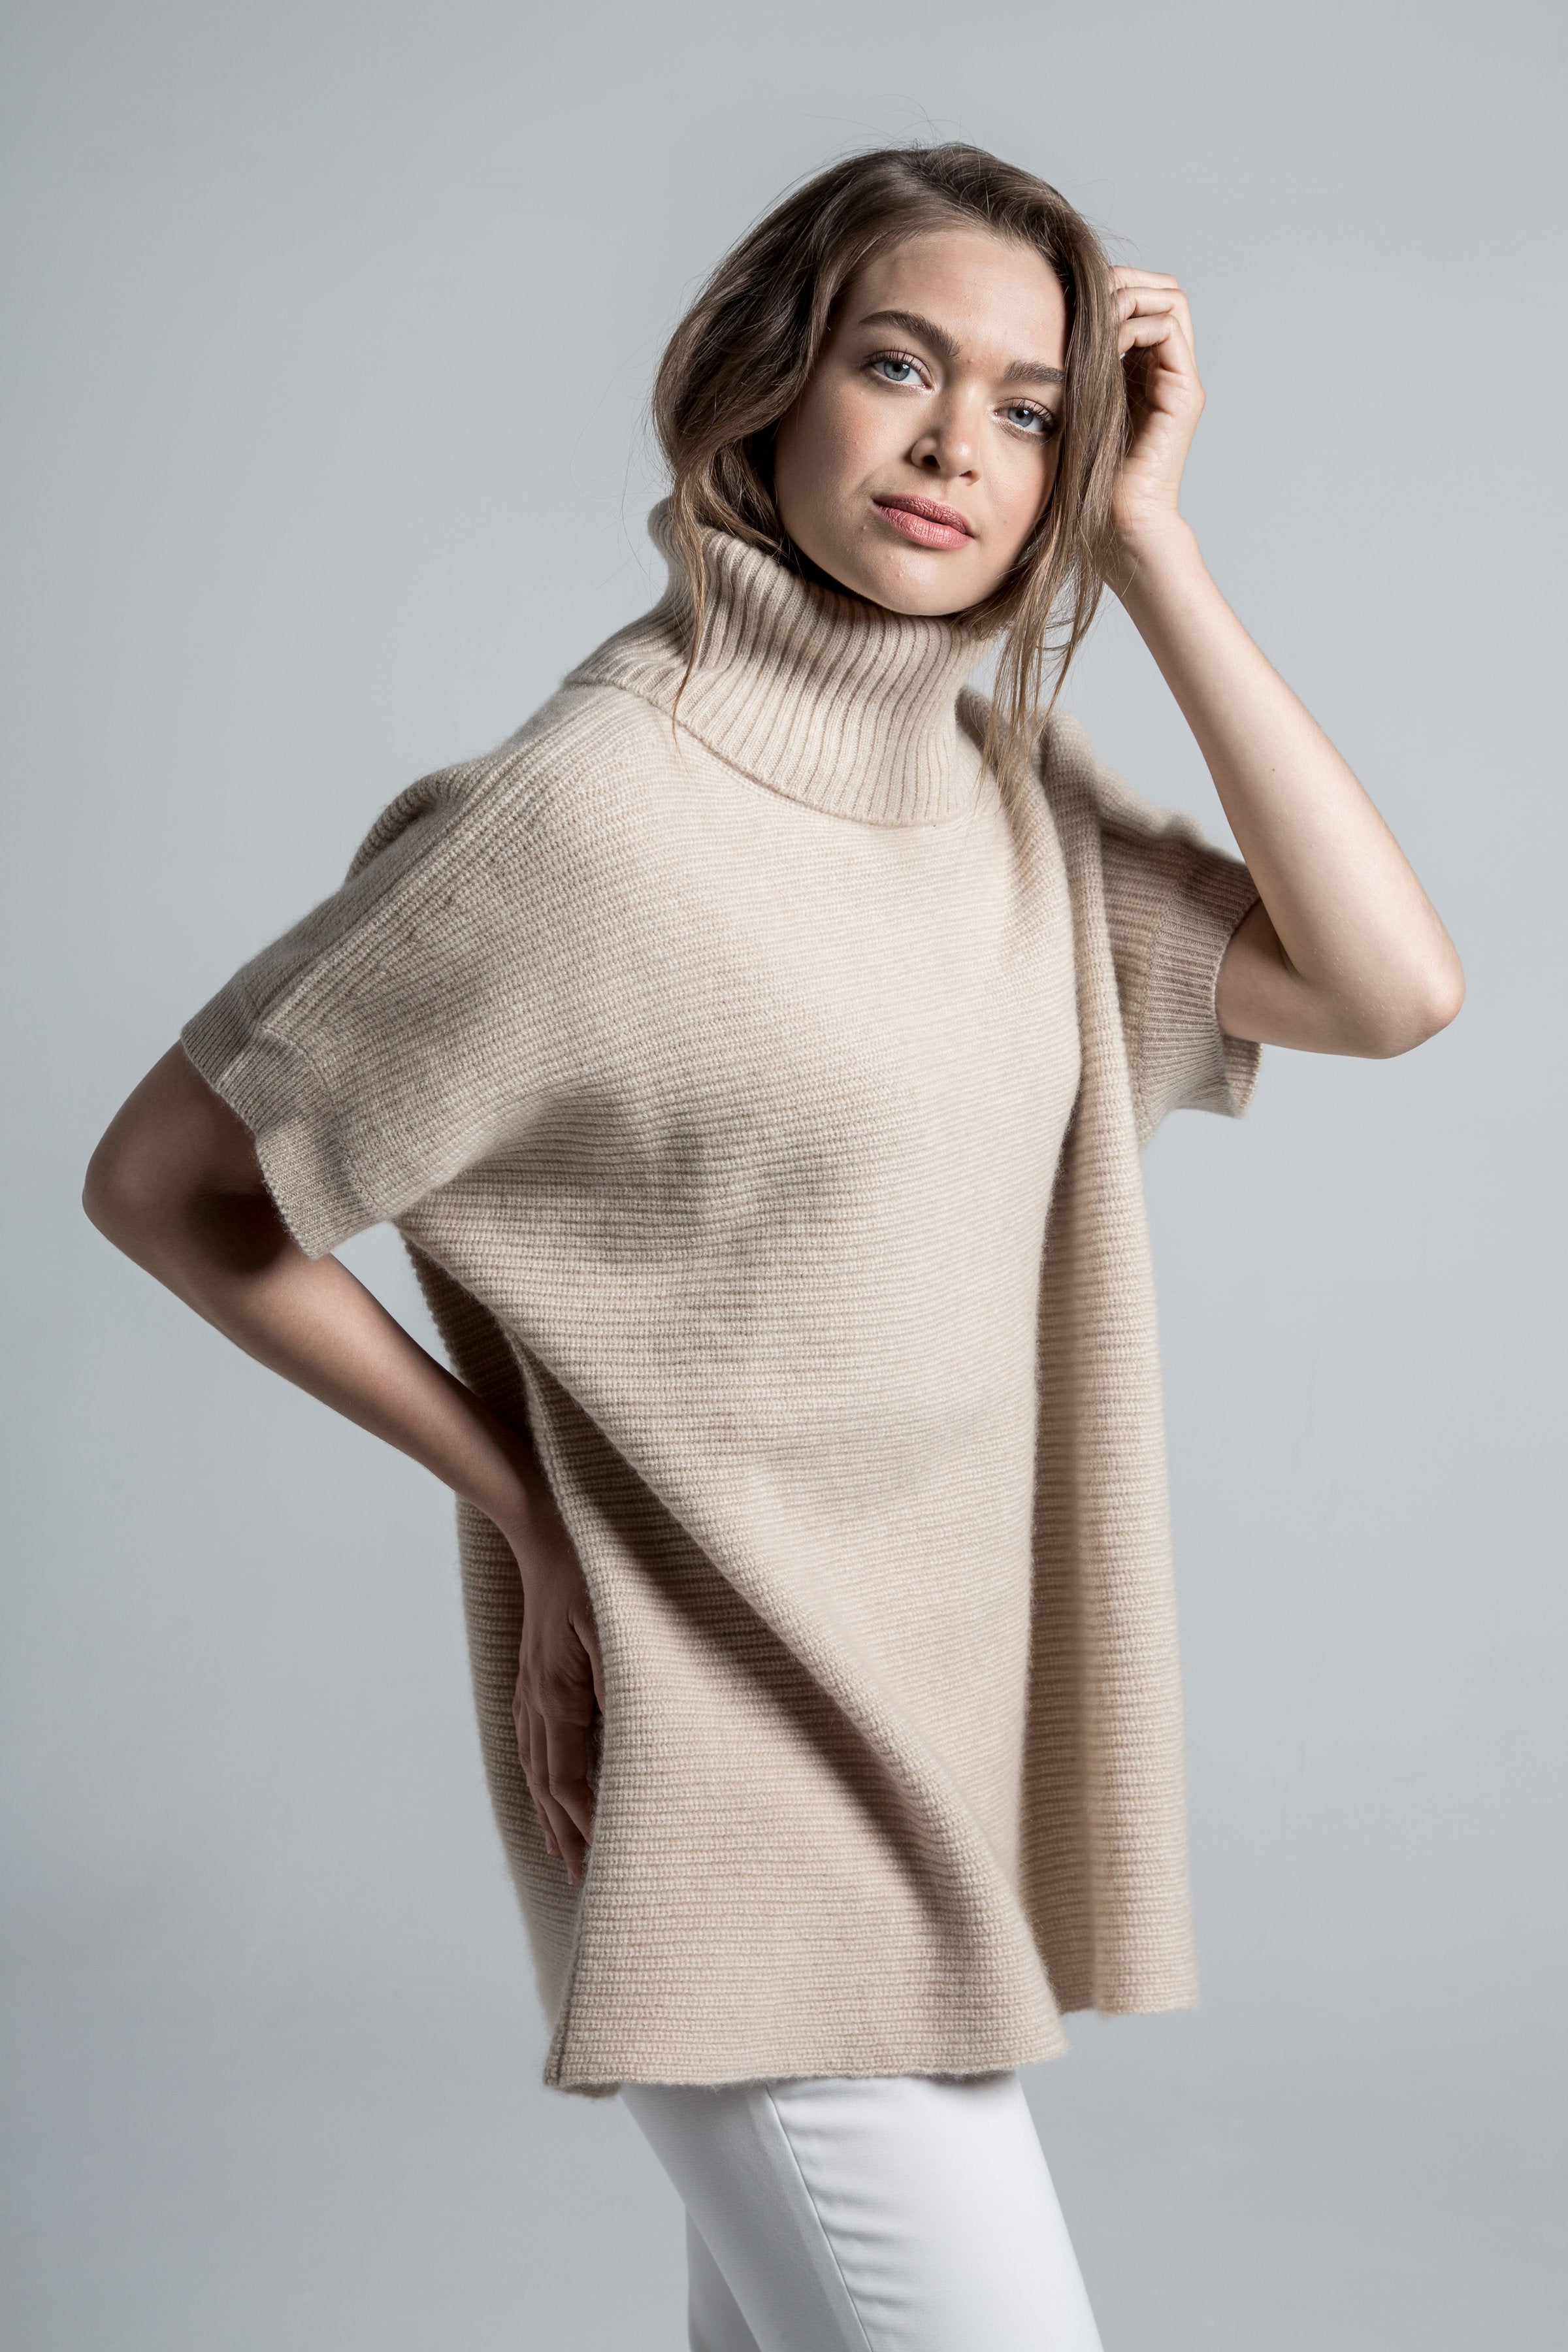 Claire Chunky Cashmere Turtleneck - Tan | Pine Cashmere Small / Tan